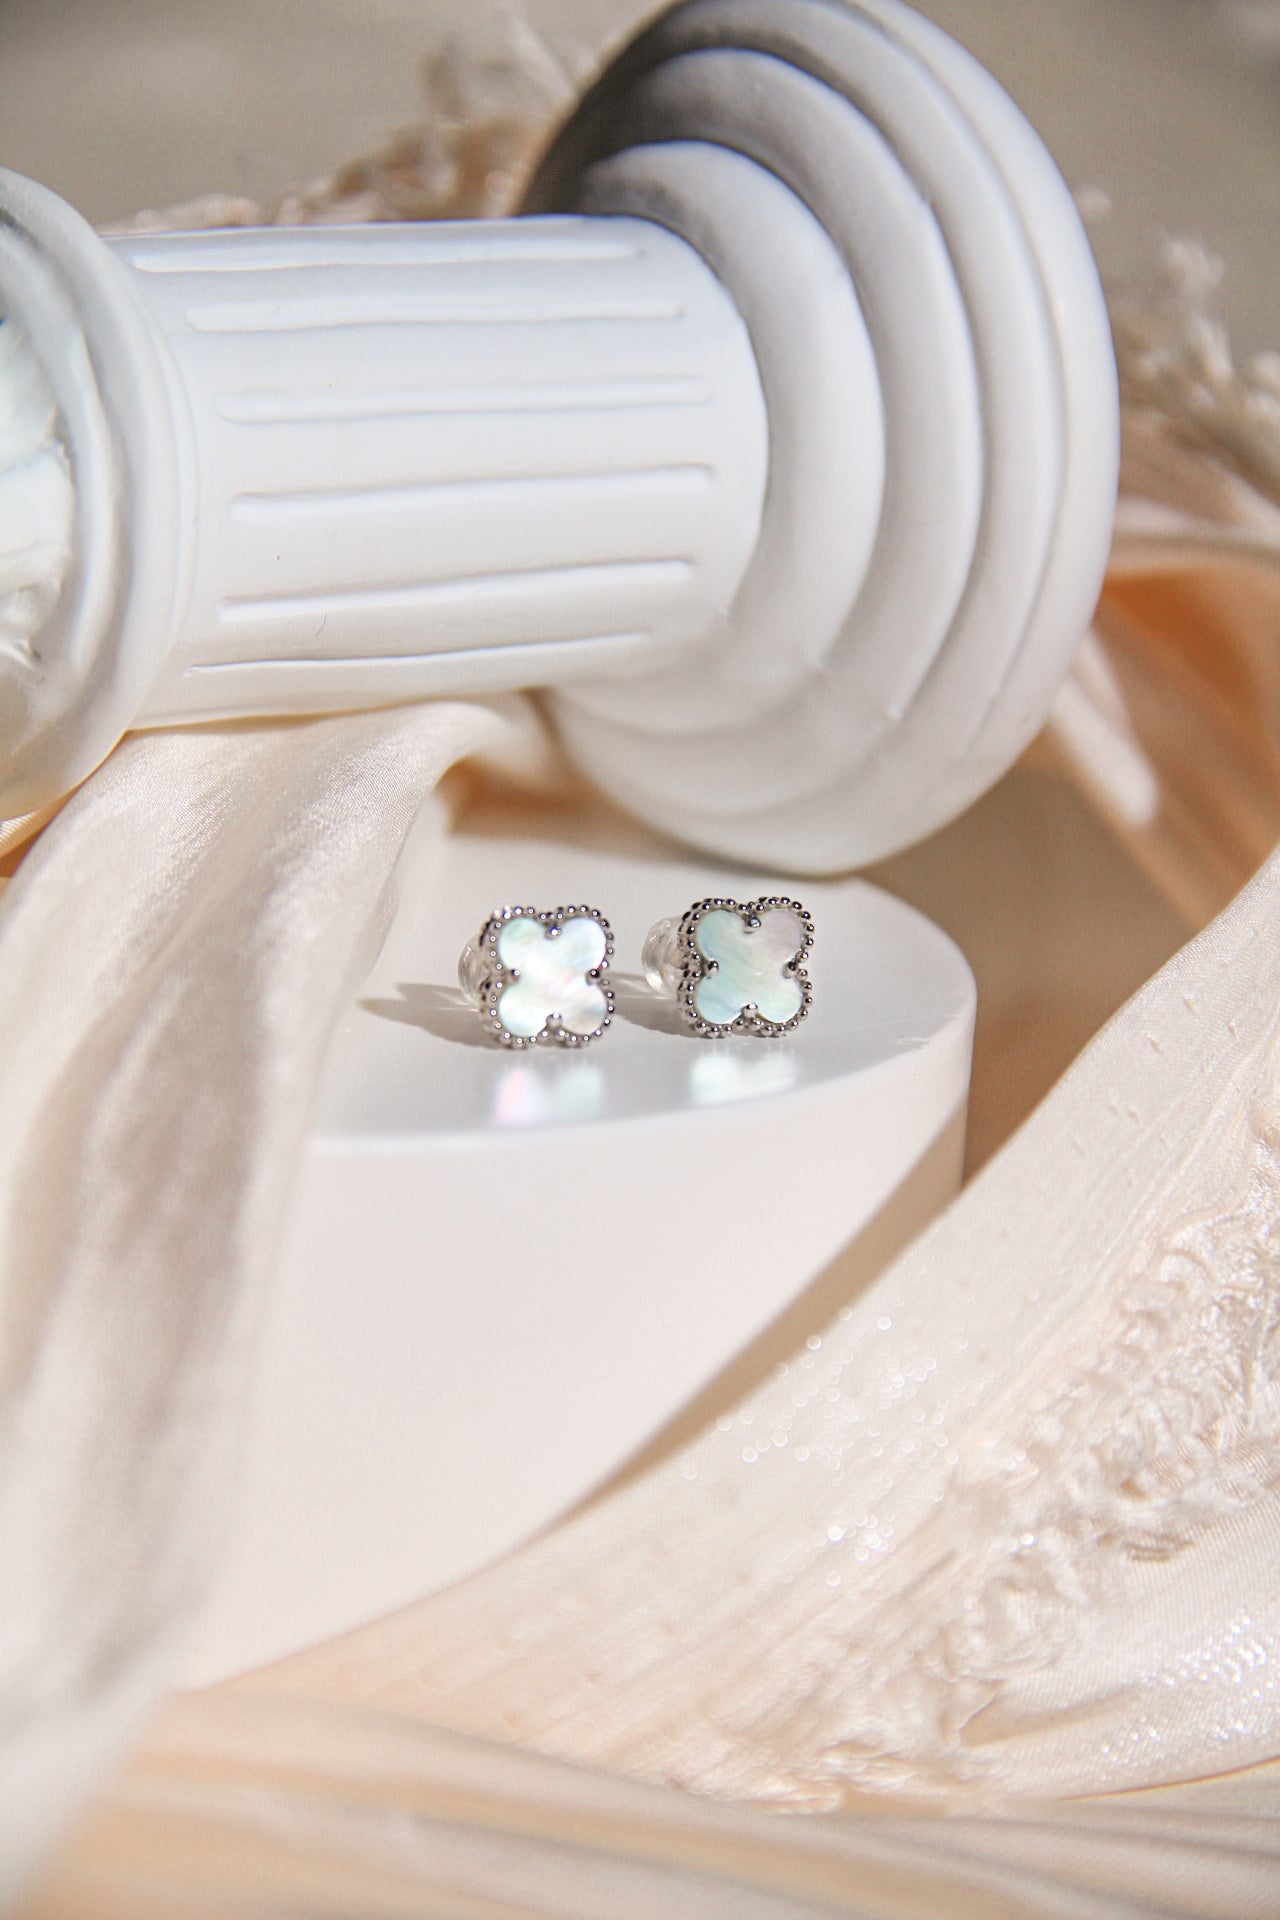 Trixie Clover Earring Stud